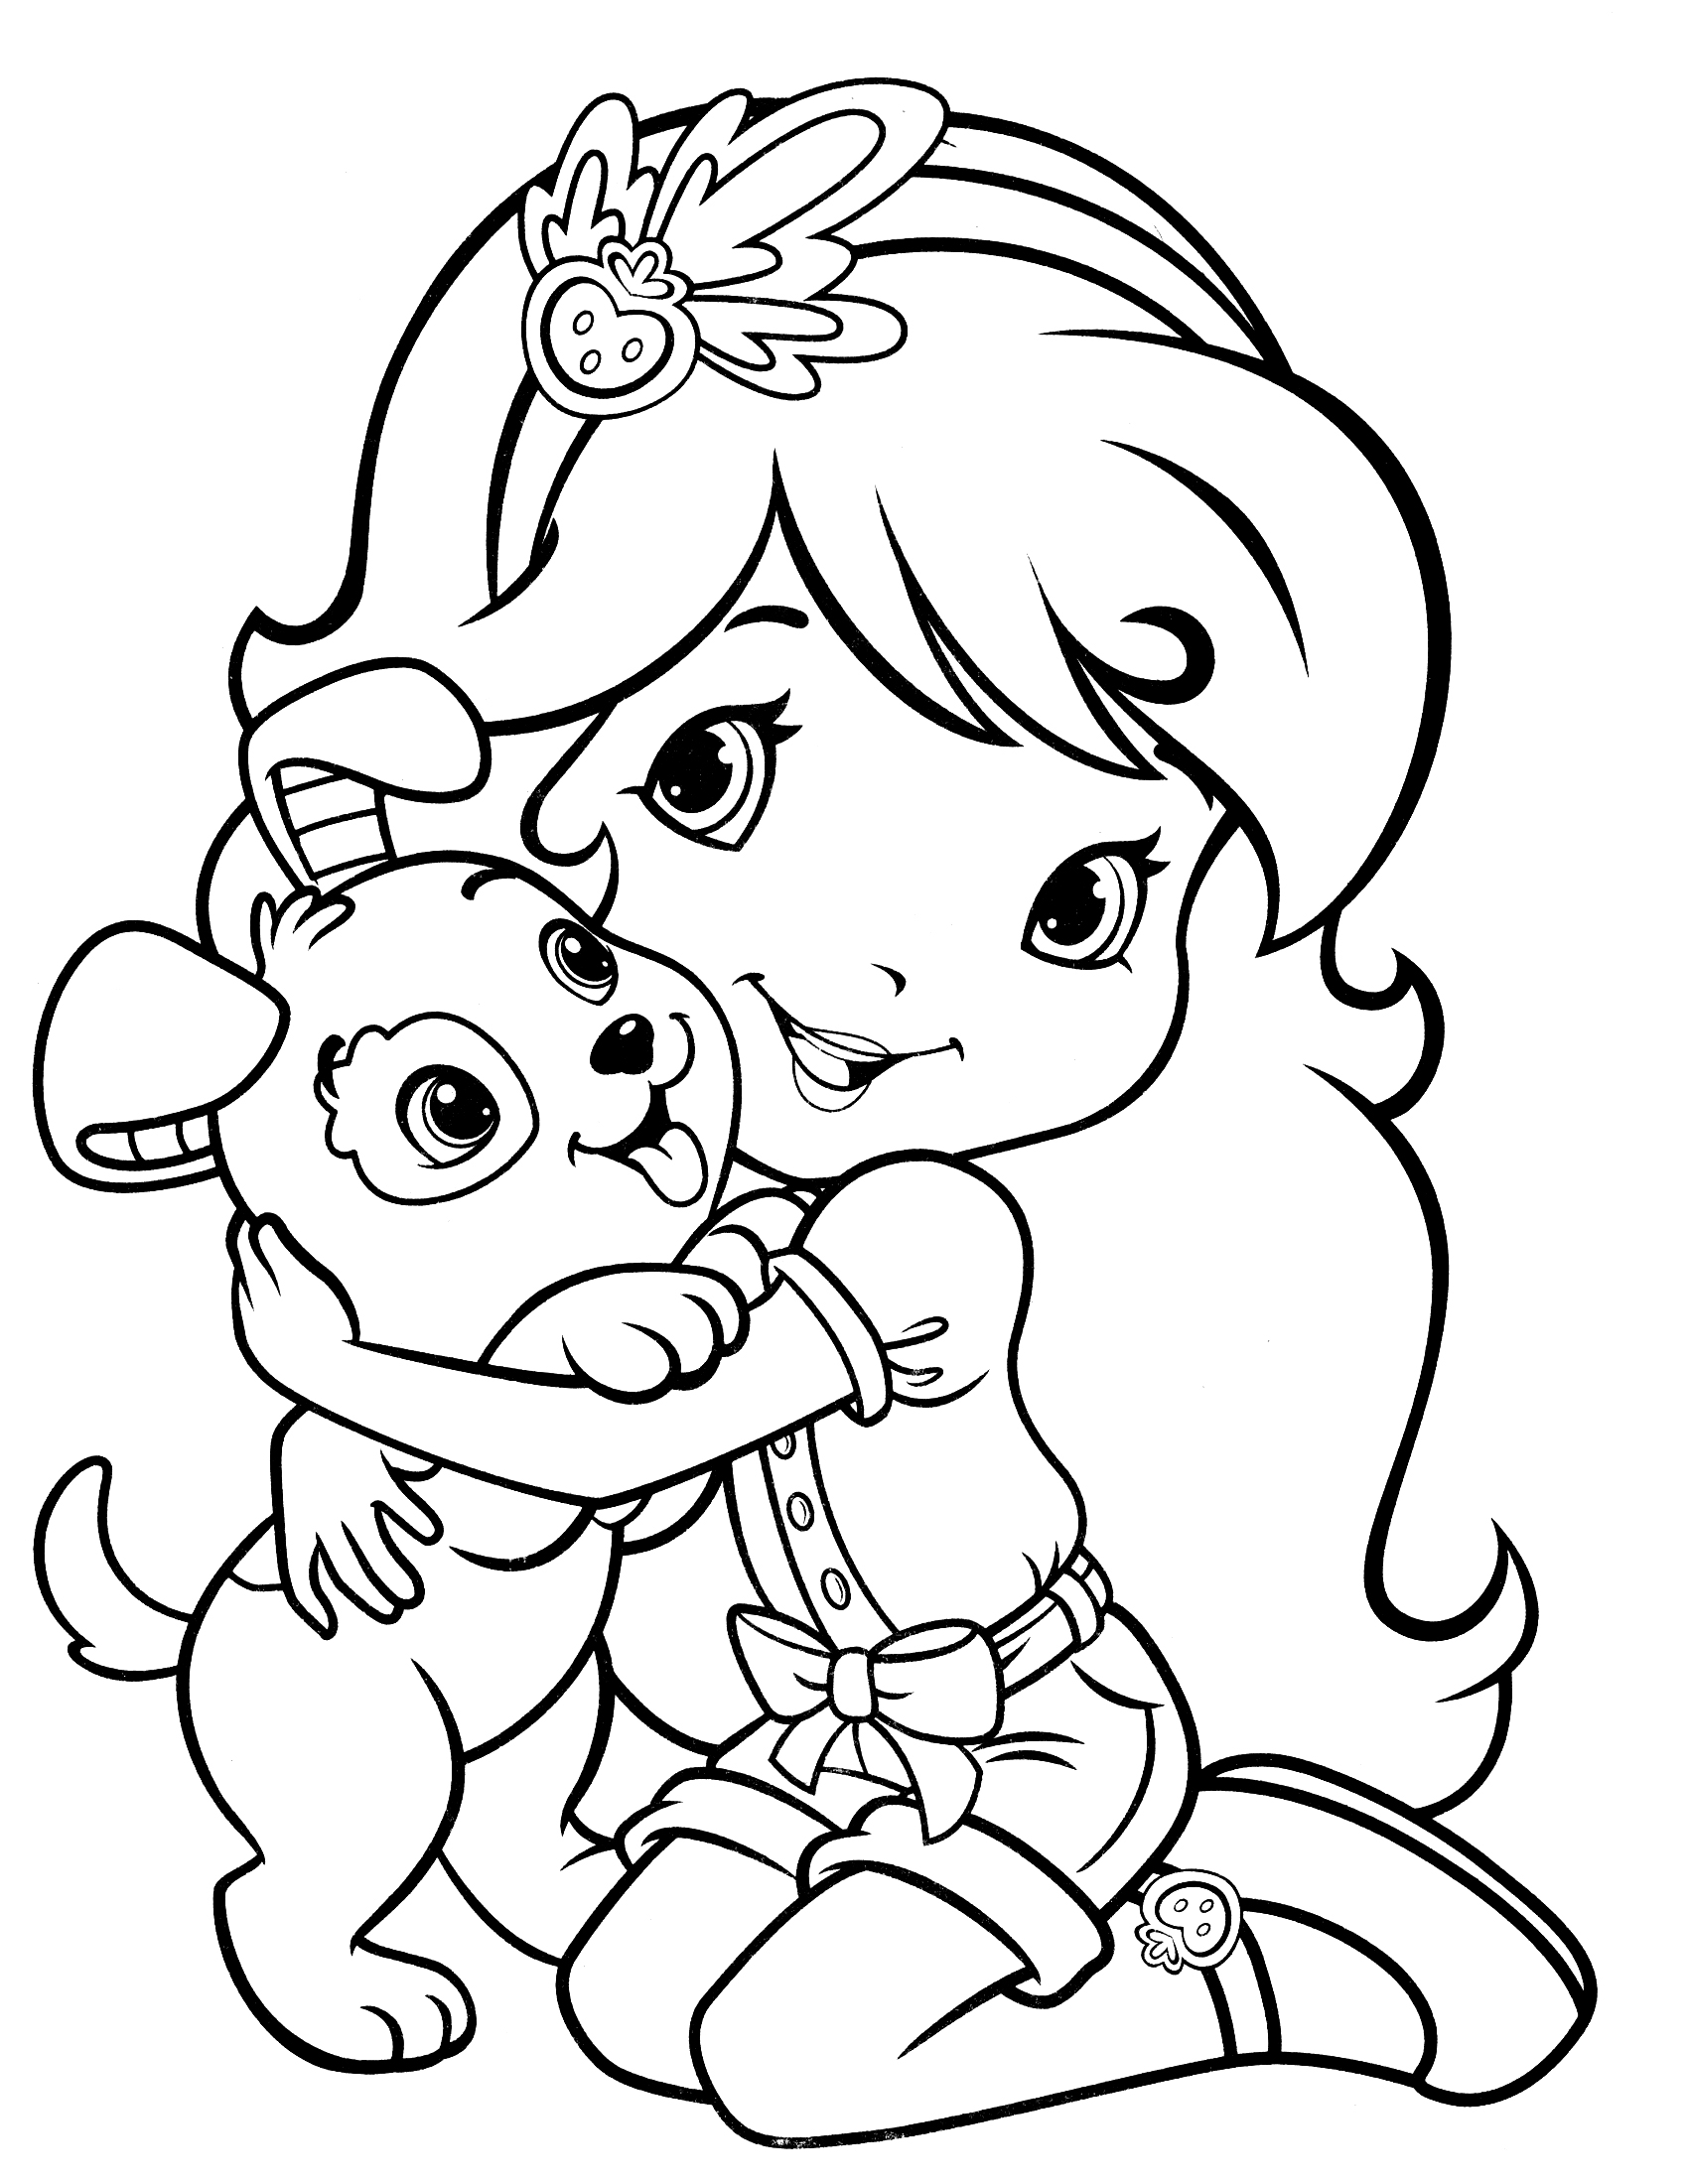  Strawberry Shortcake Coloring Pages / Cool coloring pages / 24